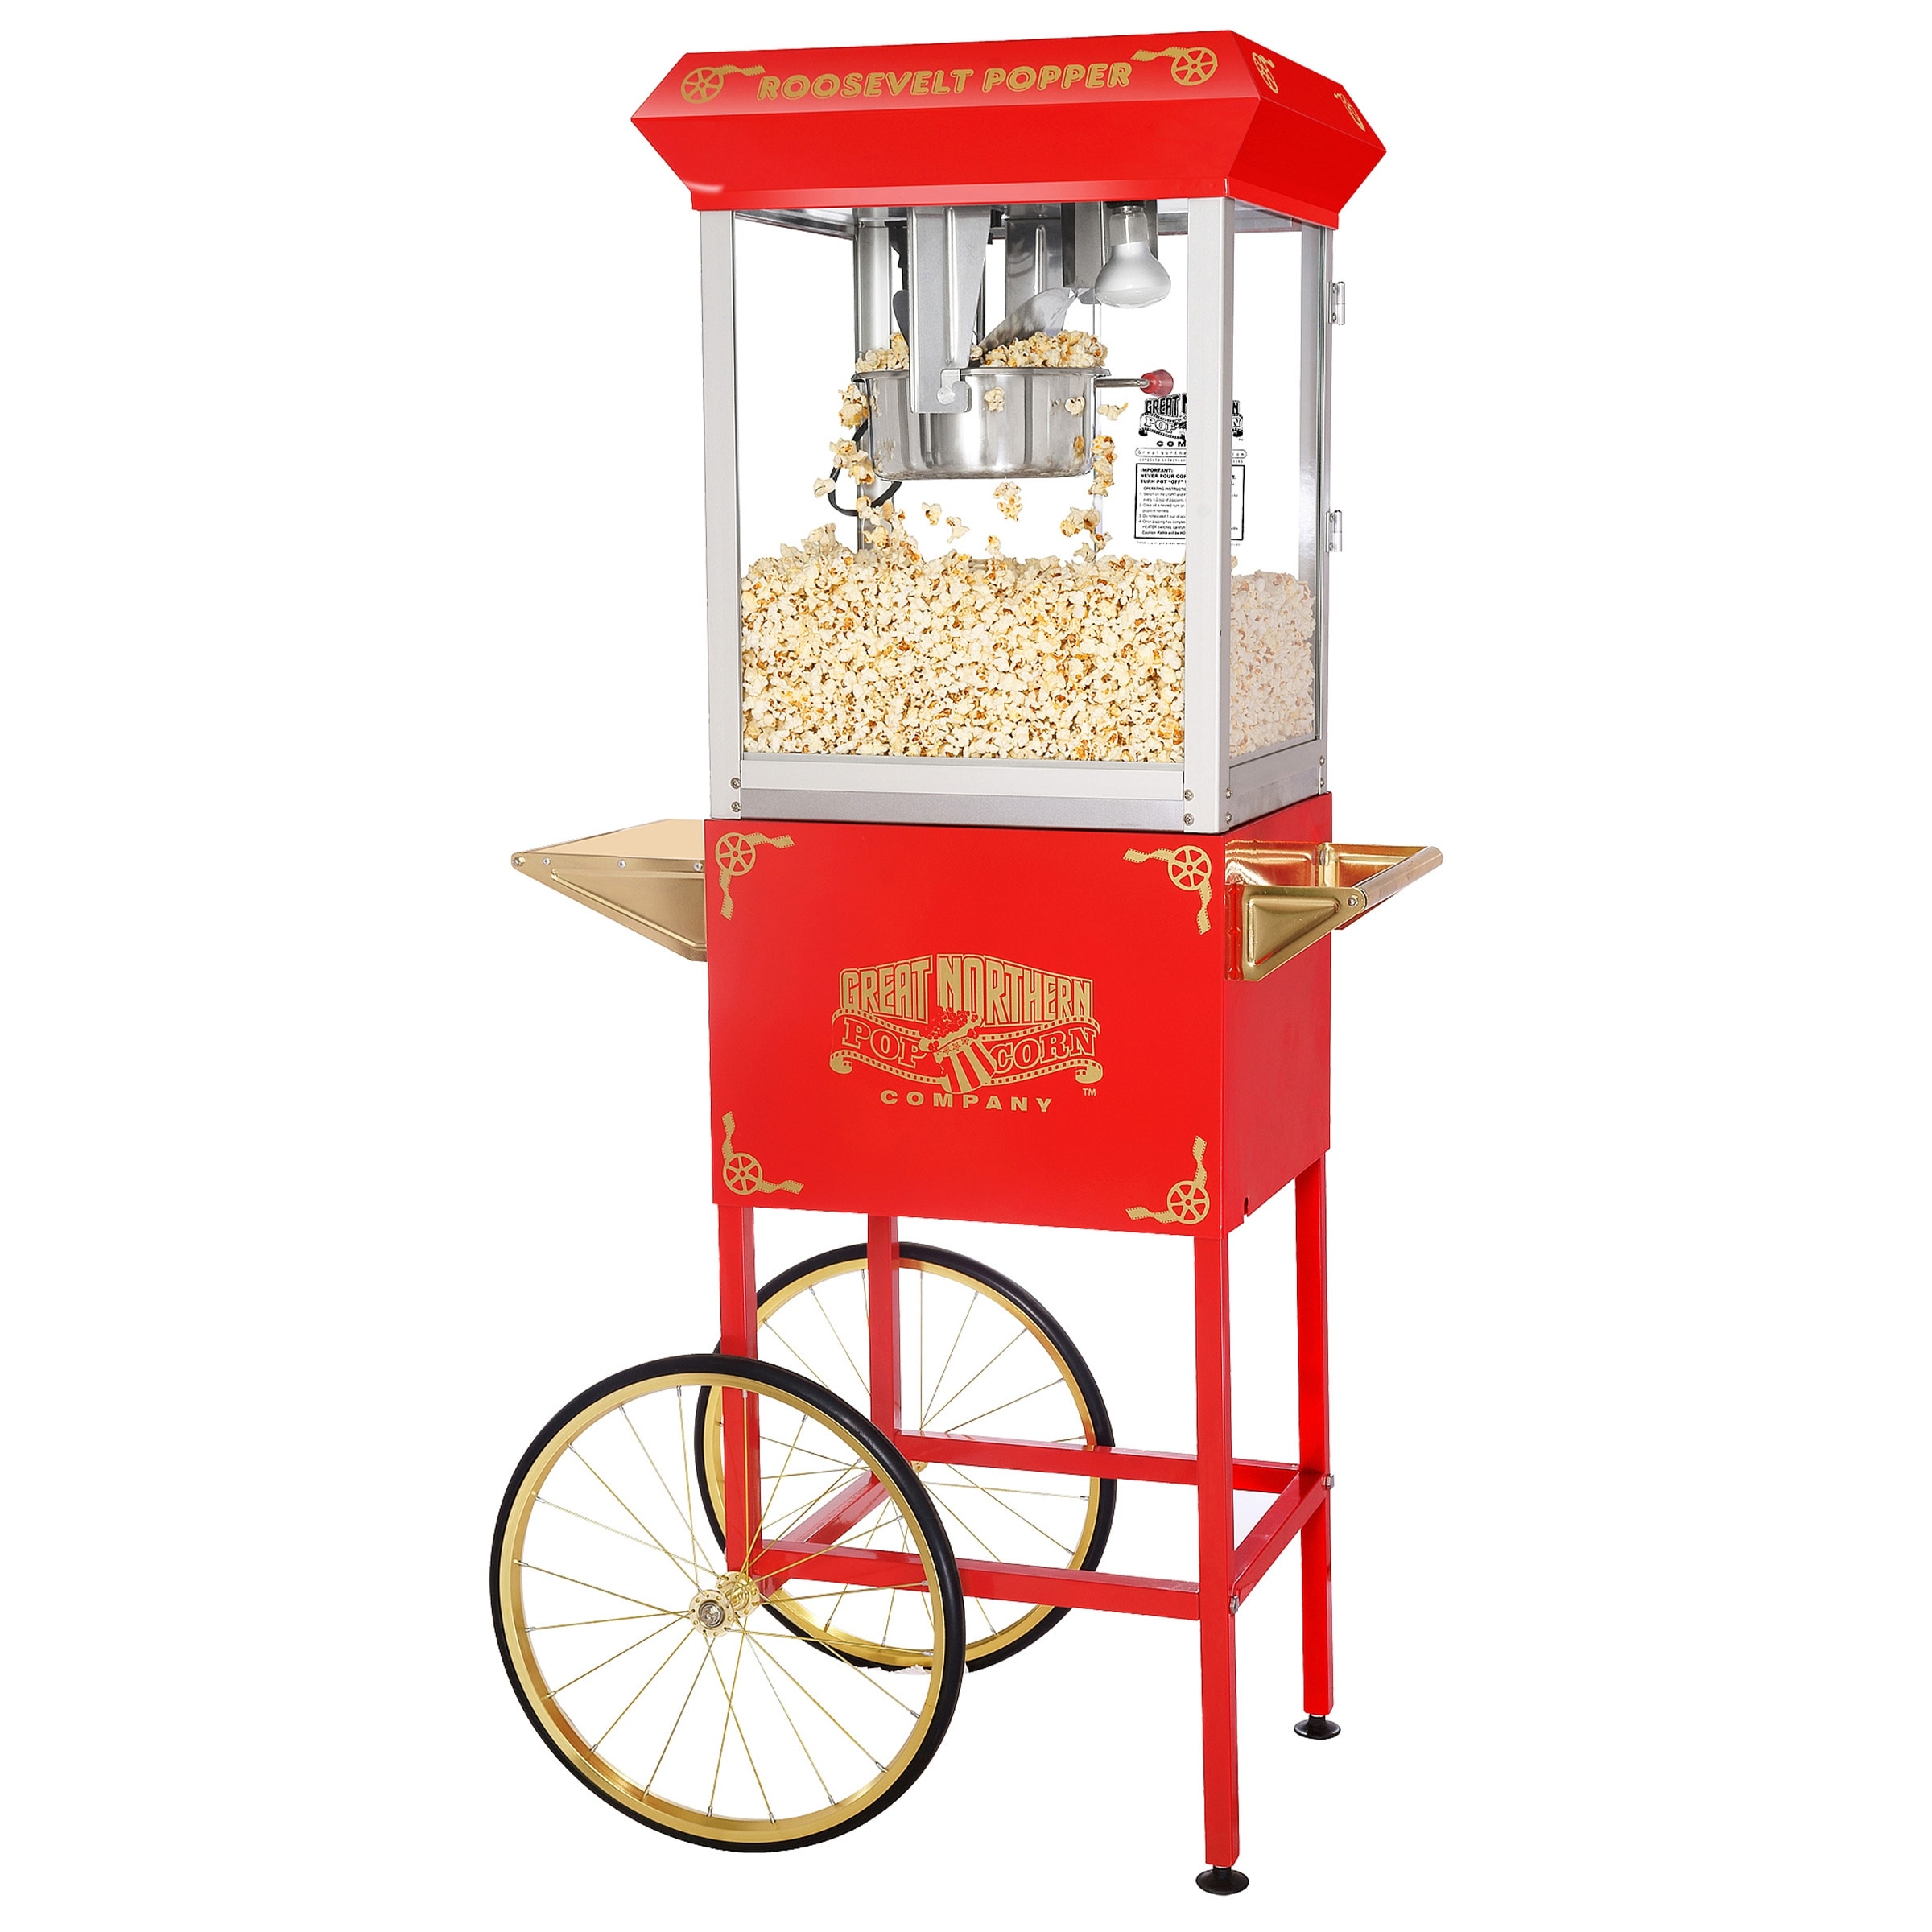 https://ak1.ostkcdn.com/images/products/is/images/direct/2ebc441c9d337b23352b3ff544313324845c27d1/Popcorn-Machine-with-Cart-%E2%80%93-8oz-Popper-with-Stainless-steel-Kettle-by-Great-Northern-Popcorn-%28Red%29.jpg